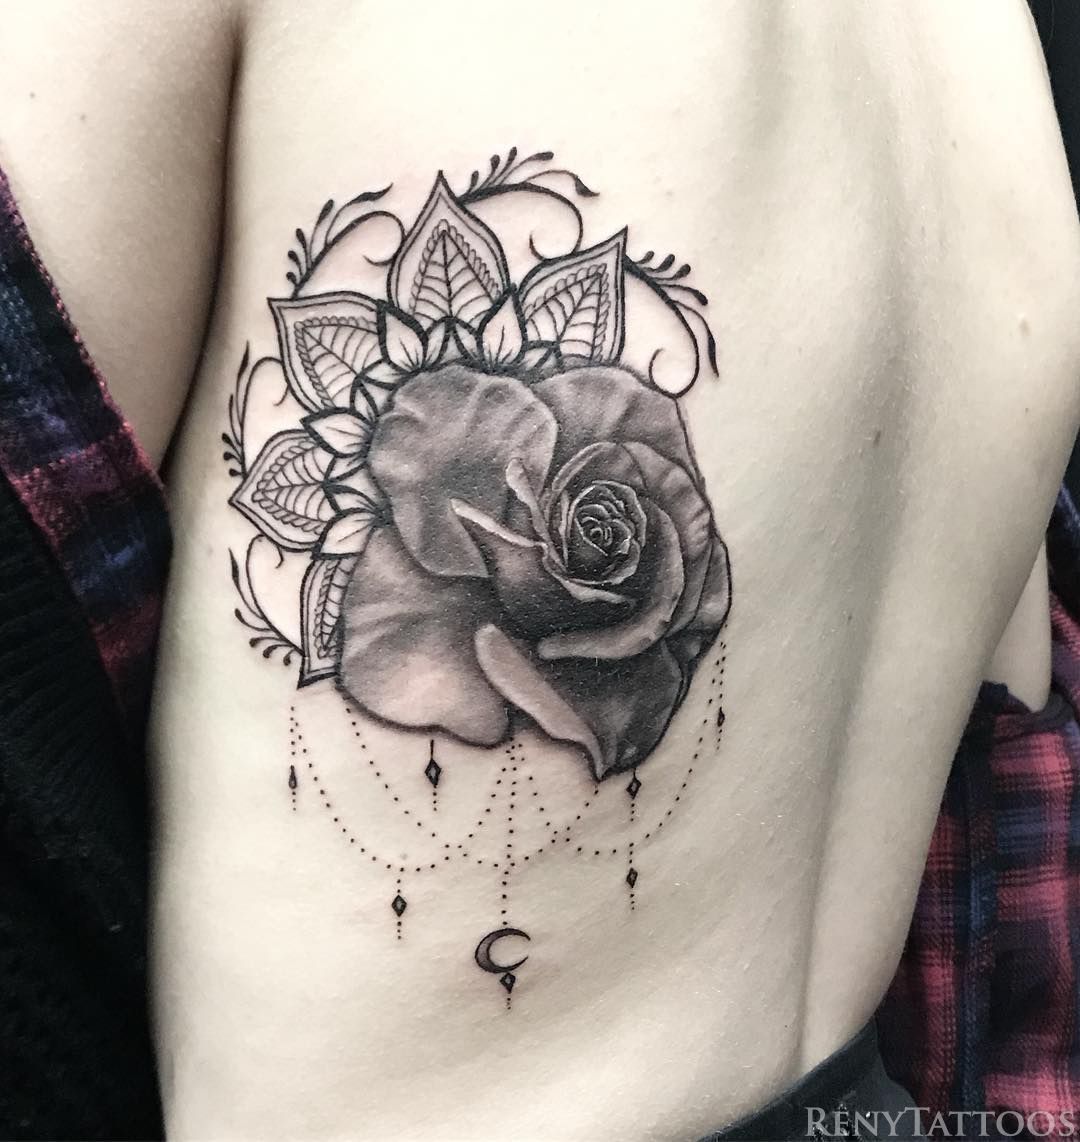 Some times we turn real... - Square Rose Tattoo & Piercing | Facebook